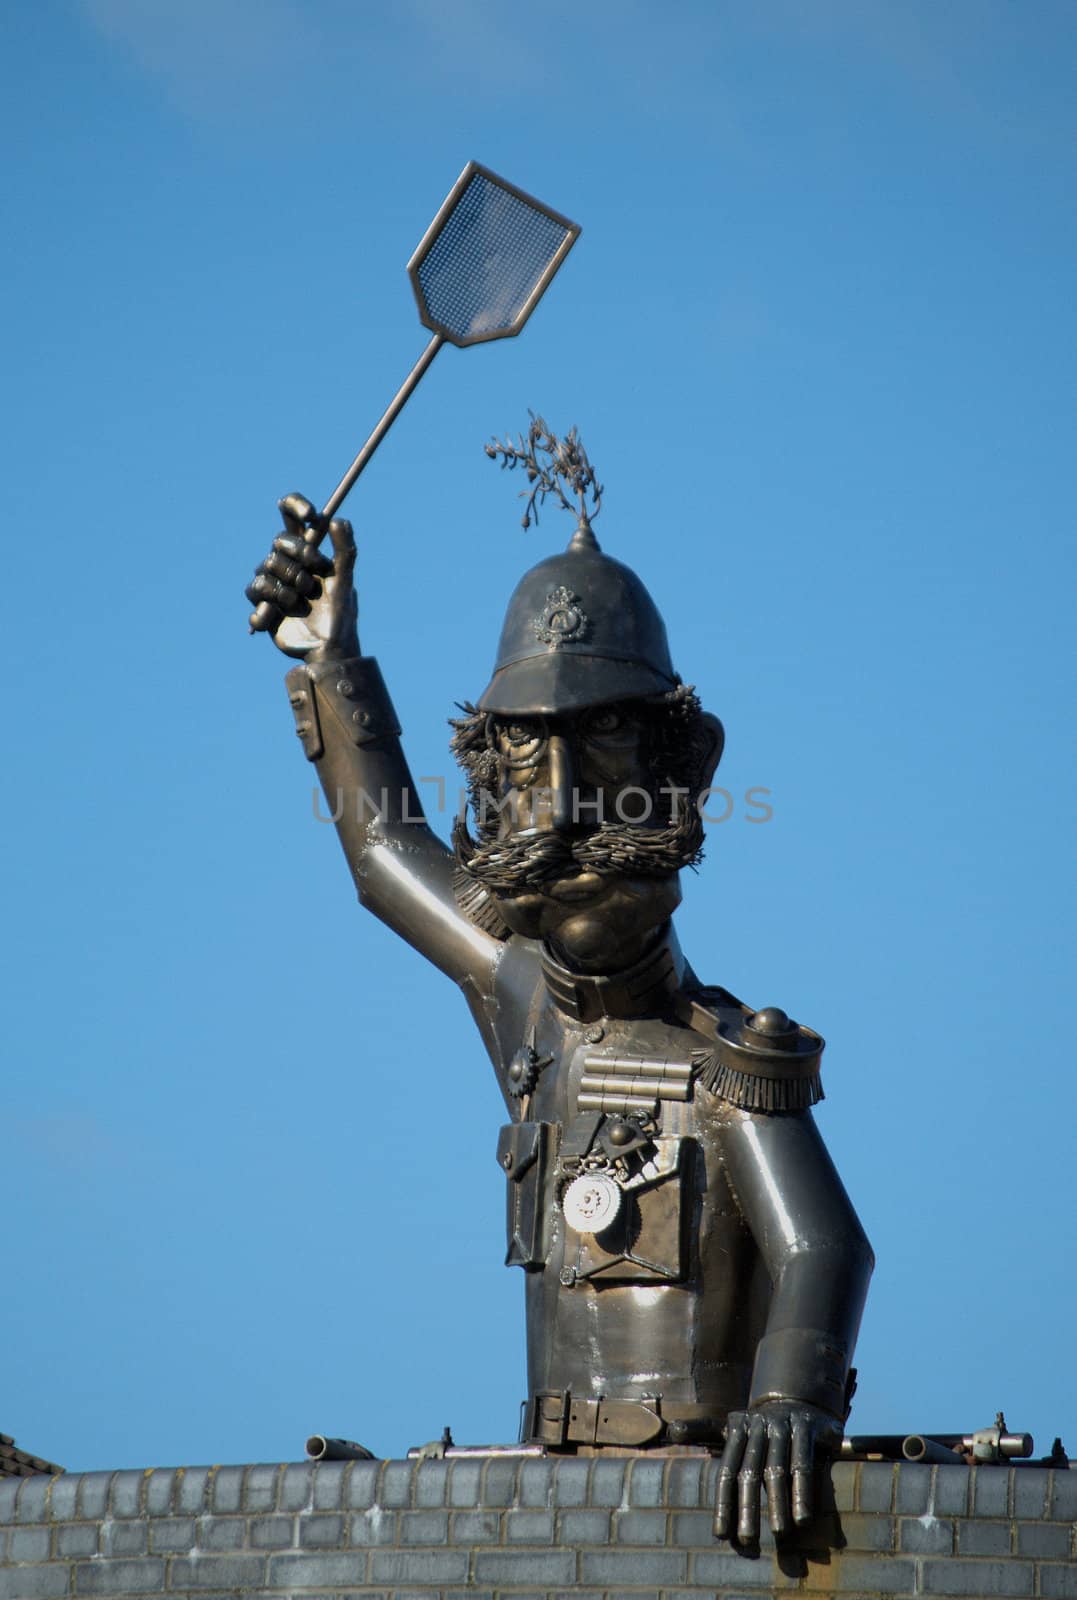 Fly swatter statue by pauws99